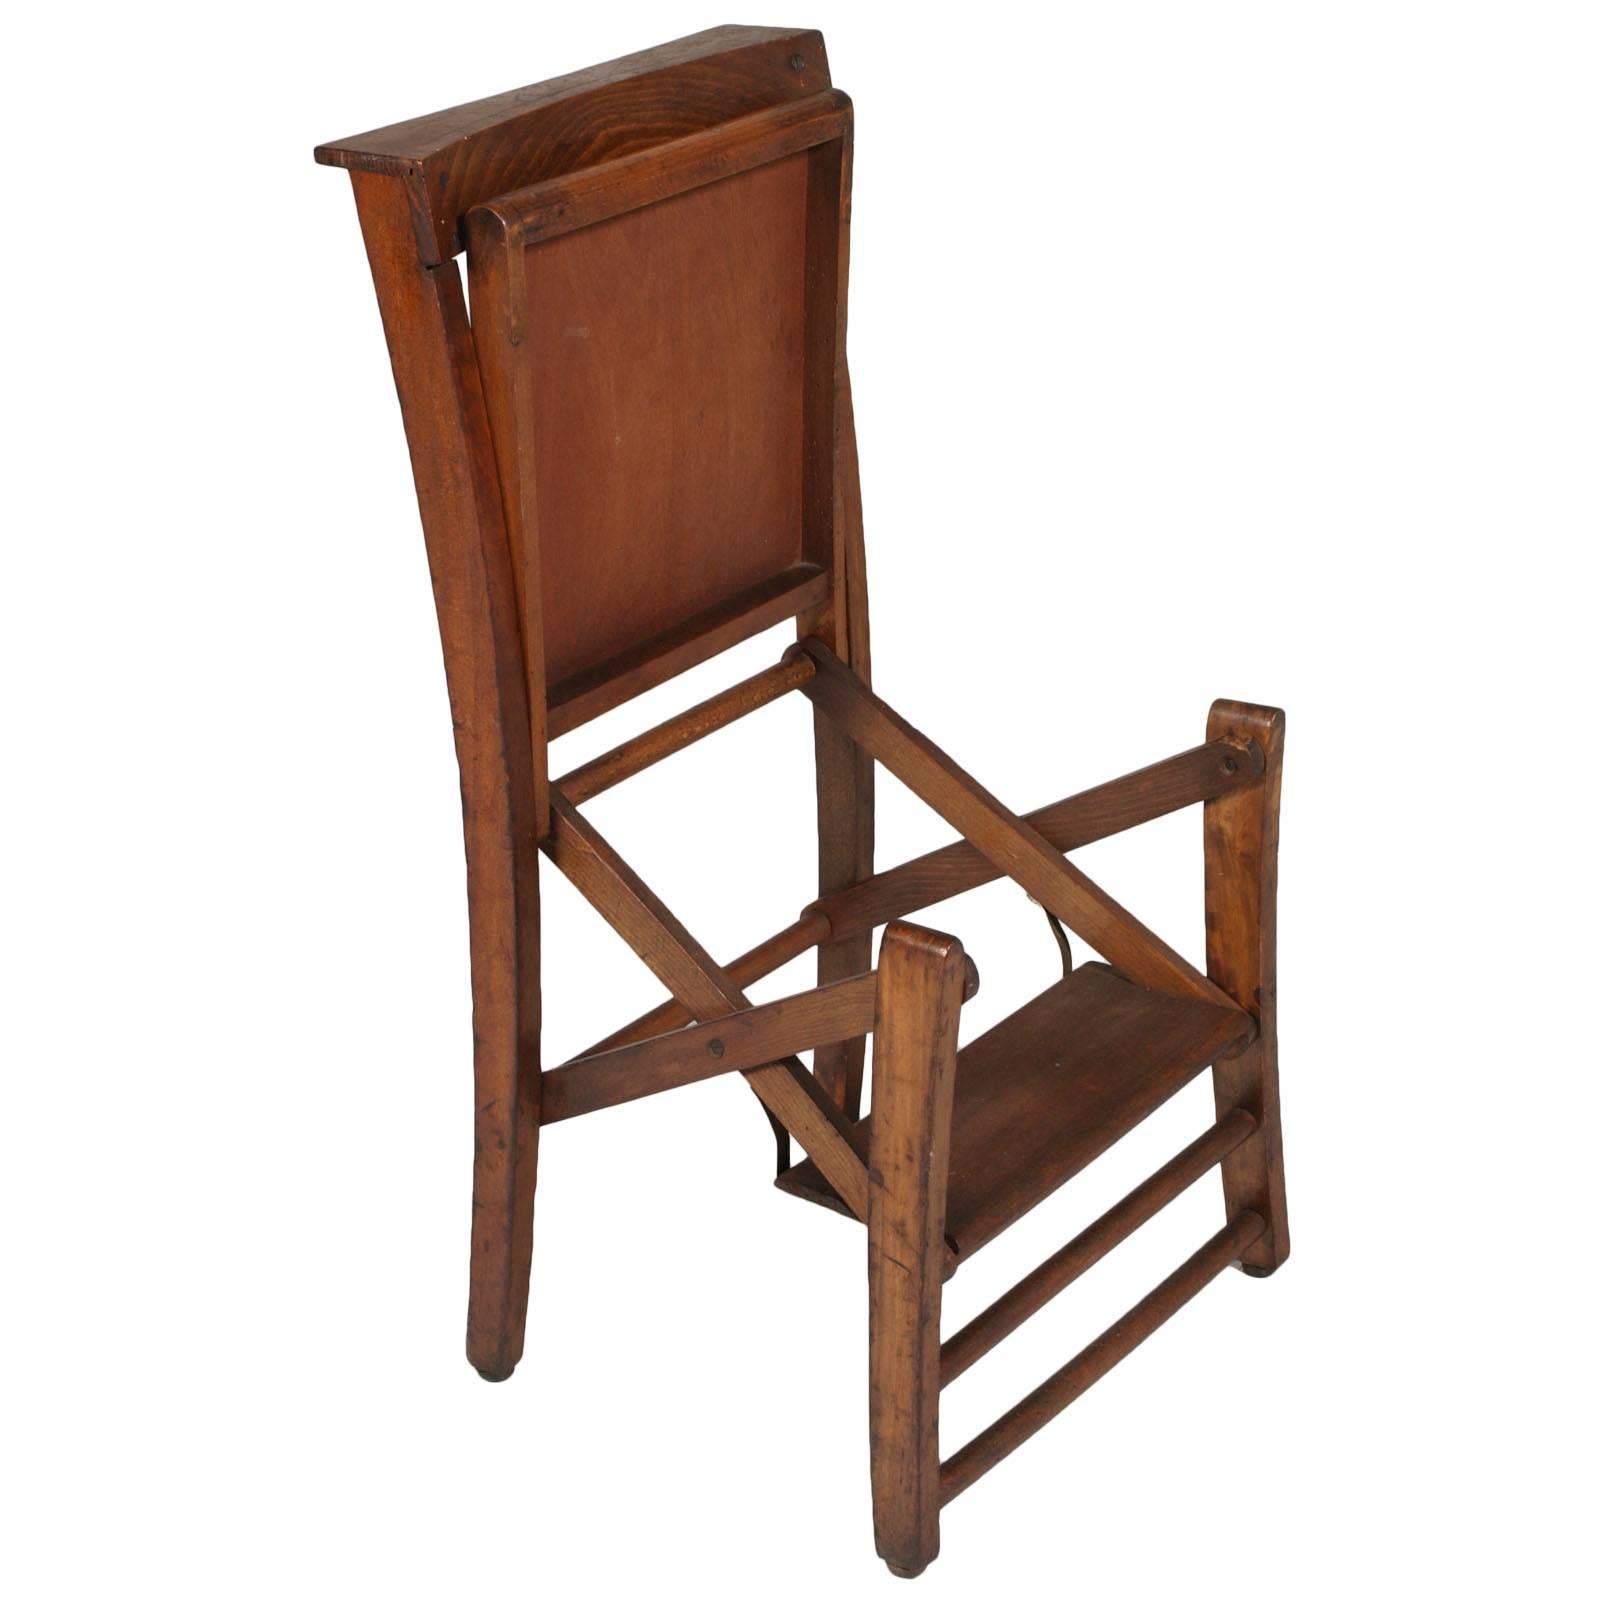 Early 20th century church chair Art Nouveau kneeling stool from St. Anthony's Cathedral In walnut and shaped seat, polished with wax.
Measures cm: H 46/84 x W 42 x D 42.